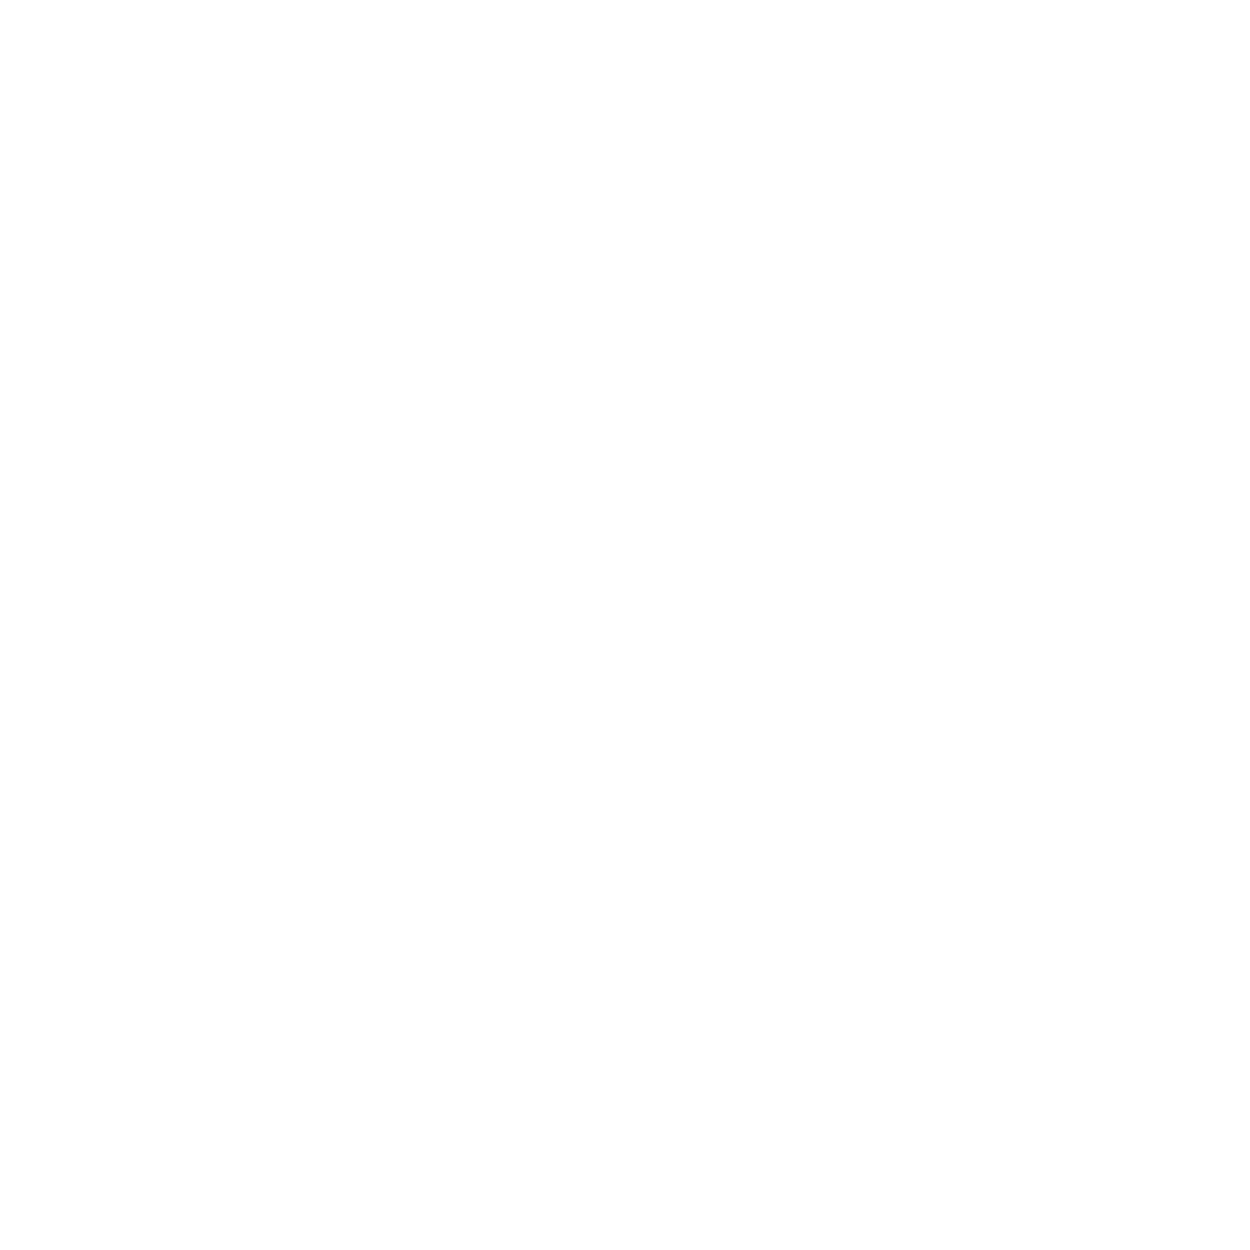 The Contrast Project